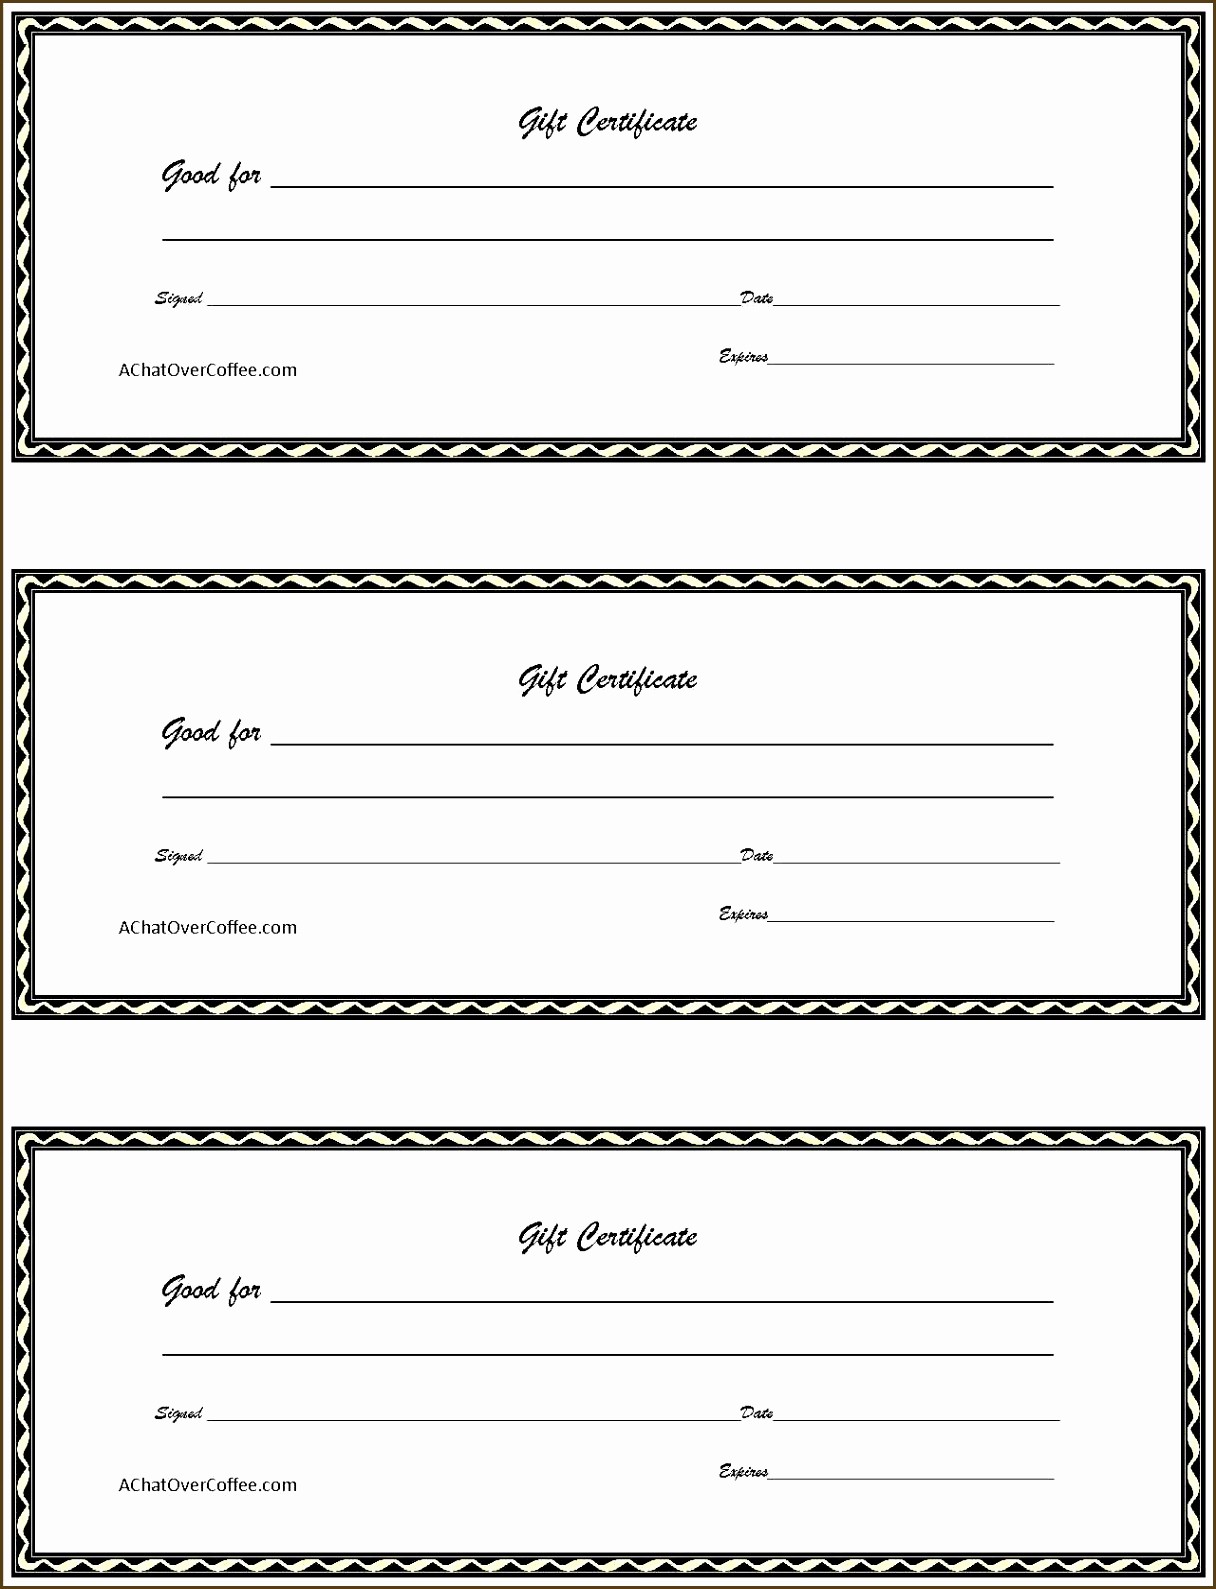 Gift Card Templates Free Printable Lovely 20 Free Gift Certificate Template